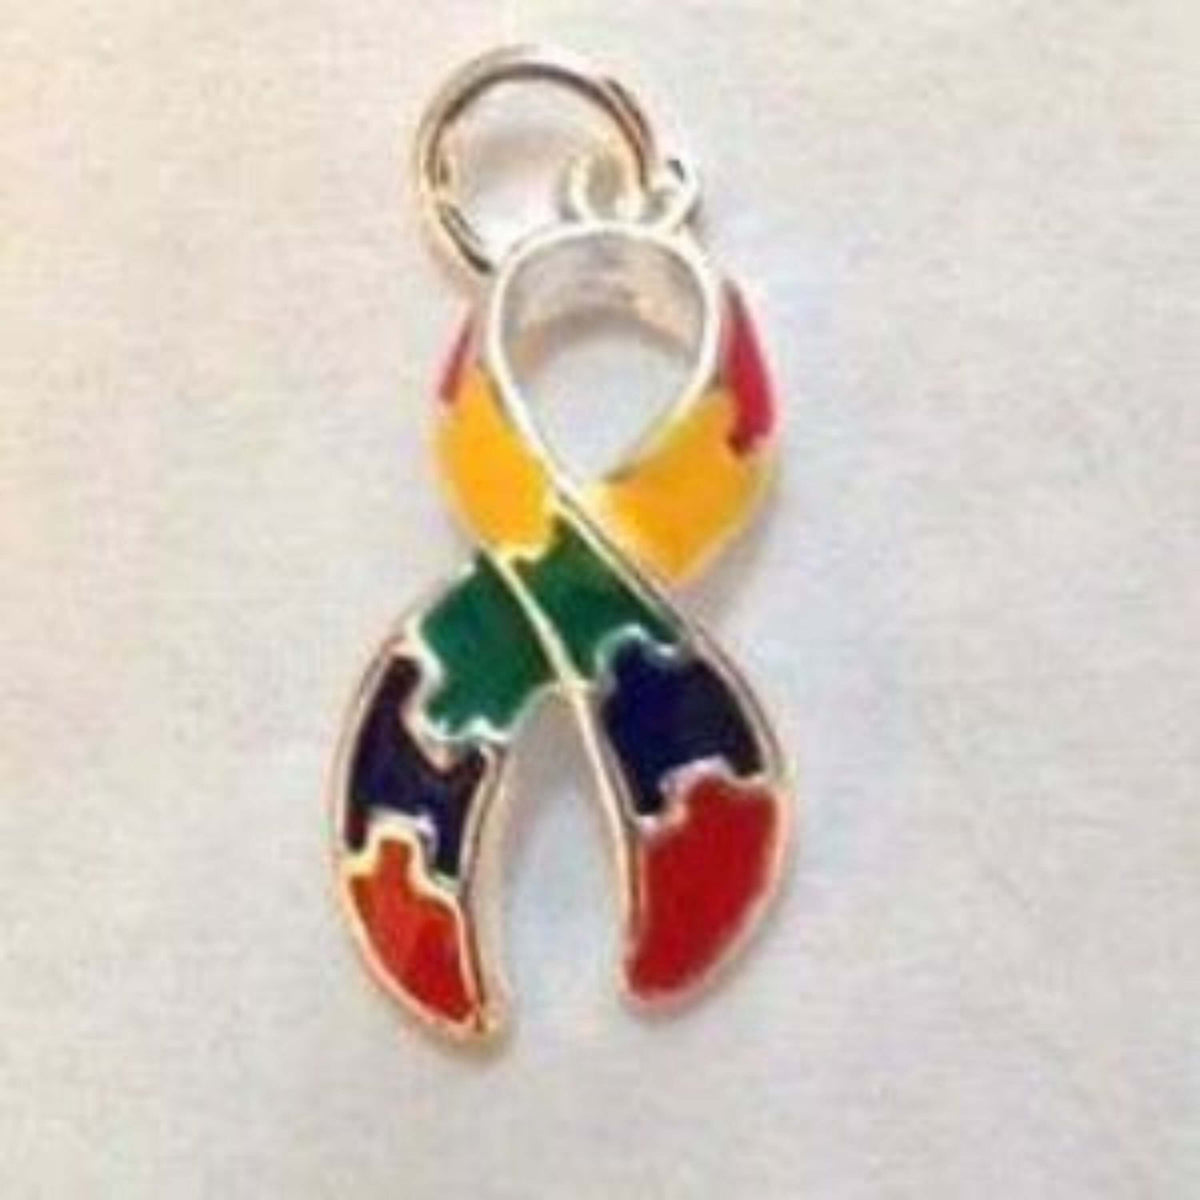 Puzzle Charm for Autism Awareness ASD and Asperger Awareness - The House of Awareness